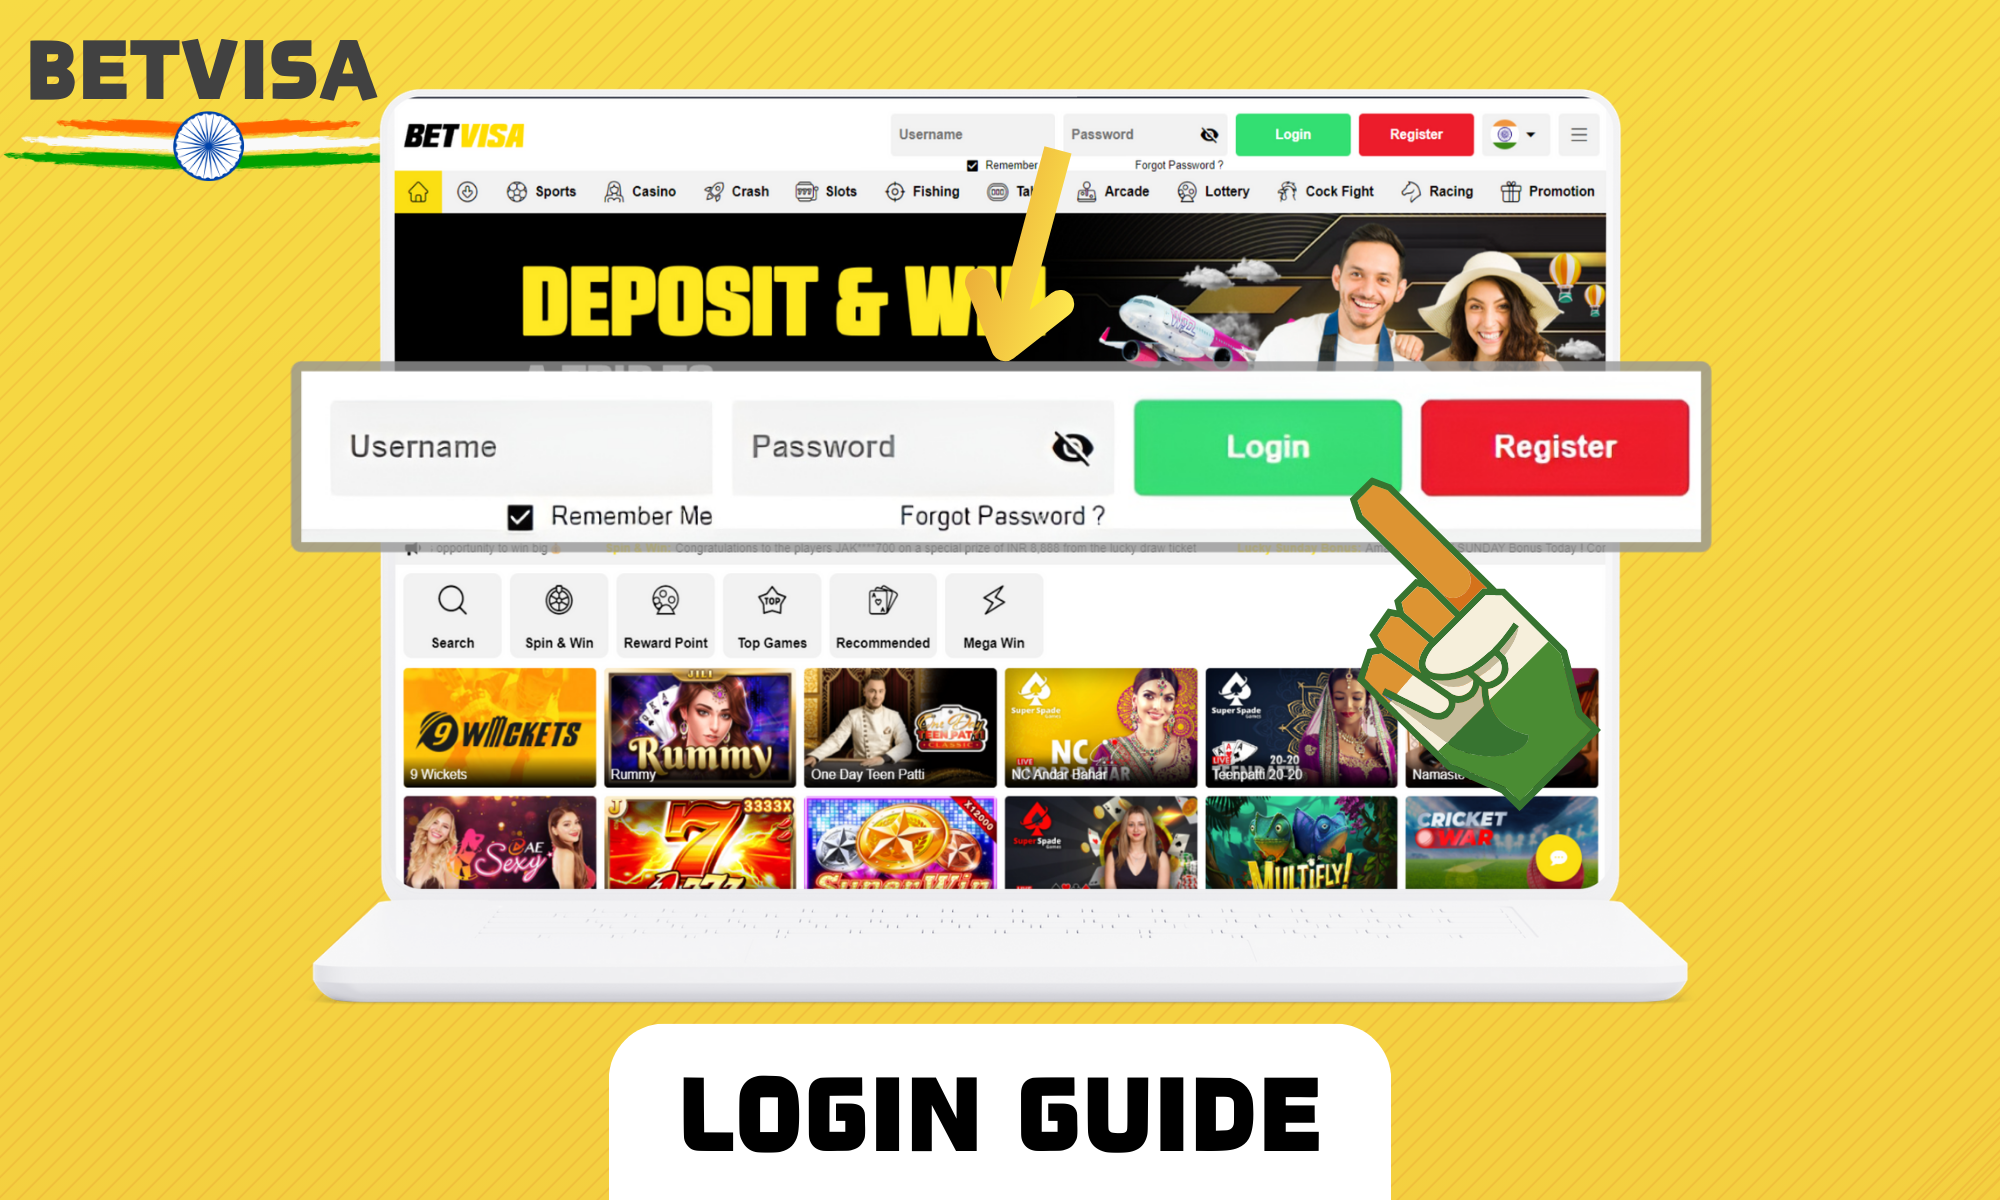 How to log in to your Betvisa account